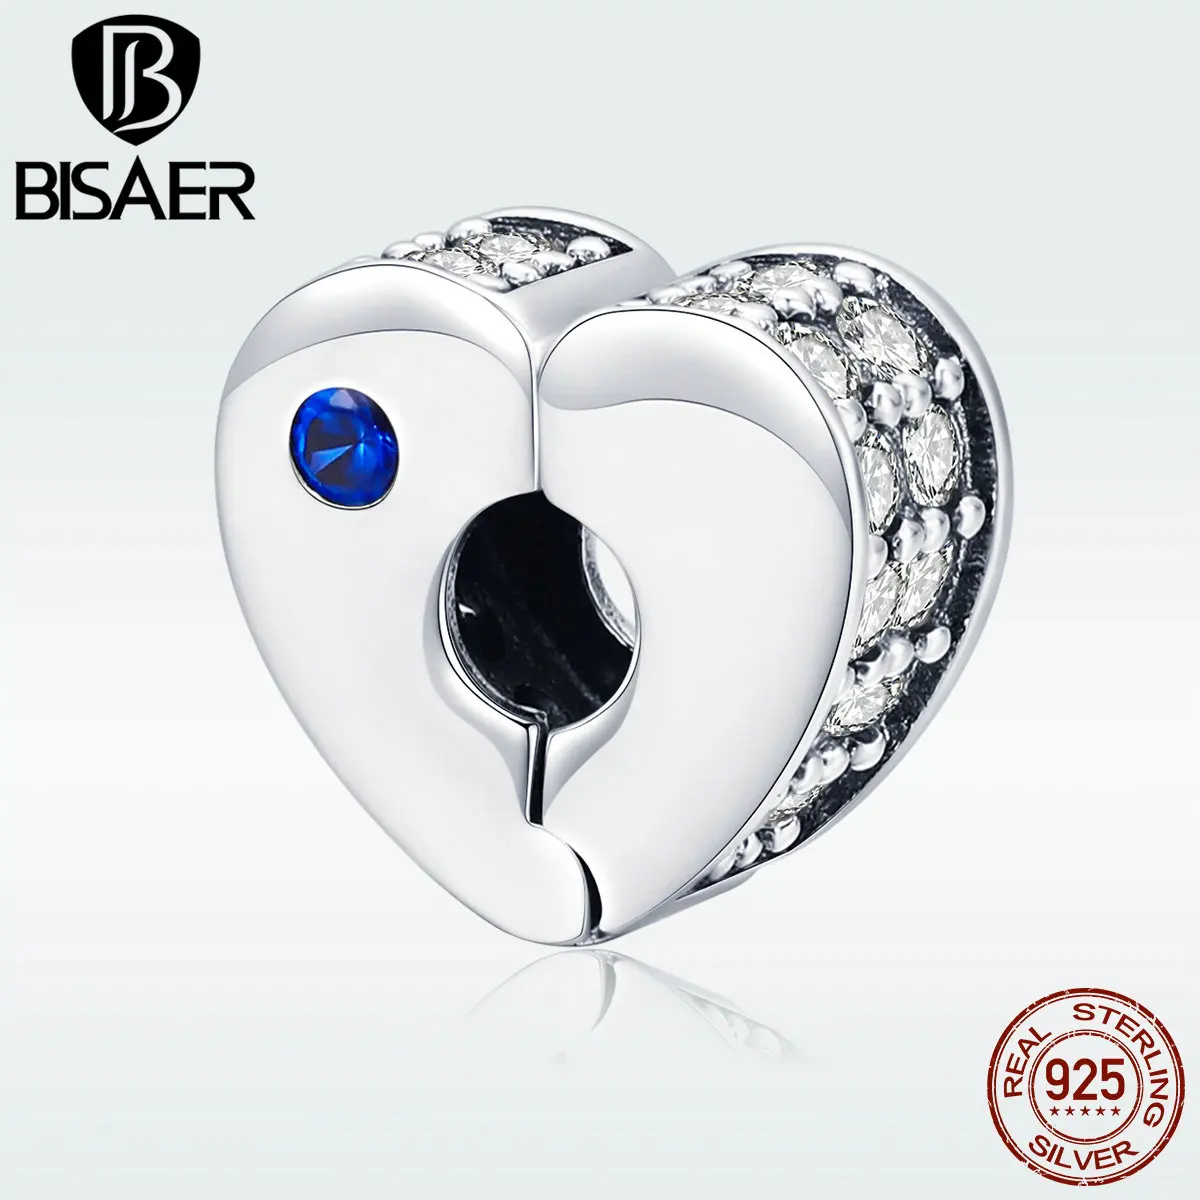 

BISAER 925 Sterling Silver Charms Heart Stopper Clear CZ Clasp Beads fit Women Bracelets DIY Silver 925 Jewelry Making ECC890